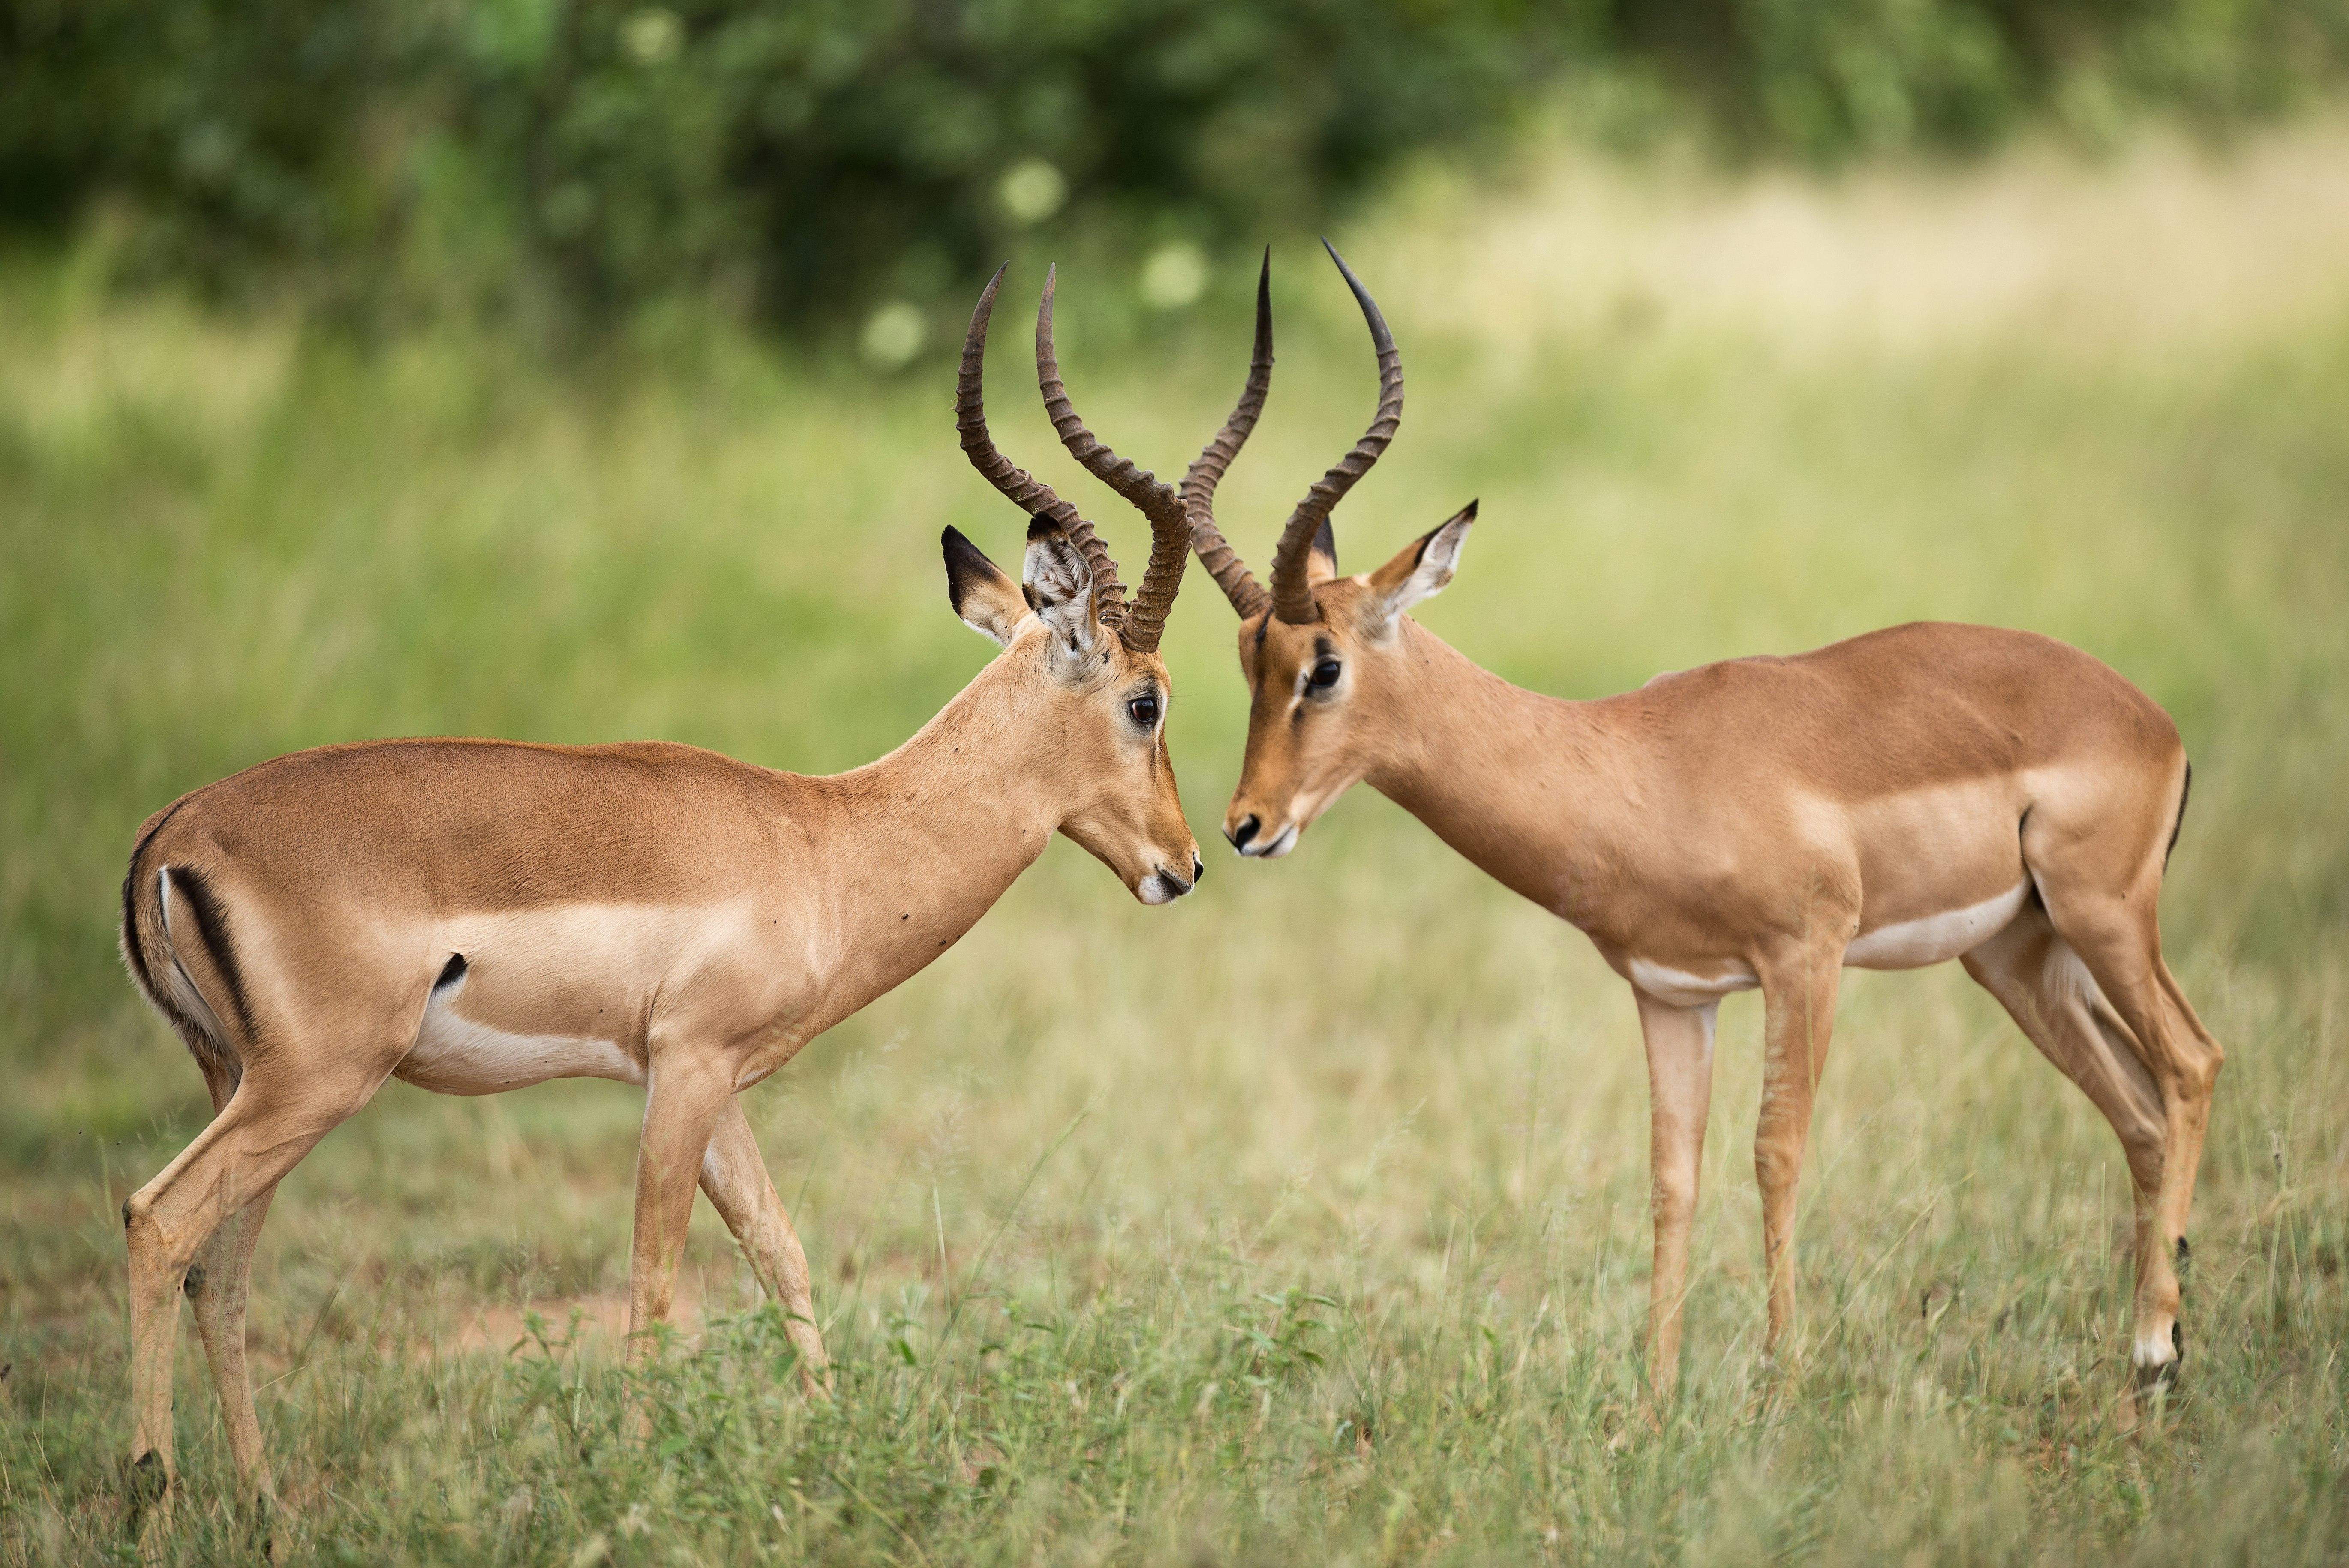 two brown deer on green grass field during daytime